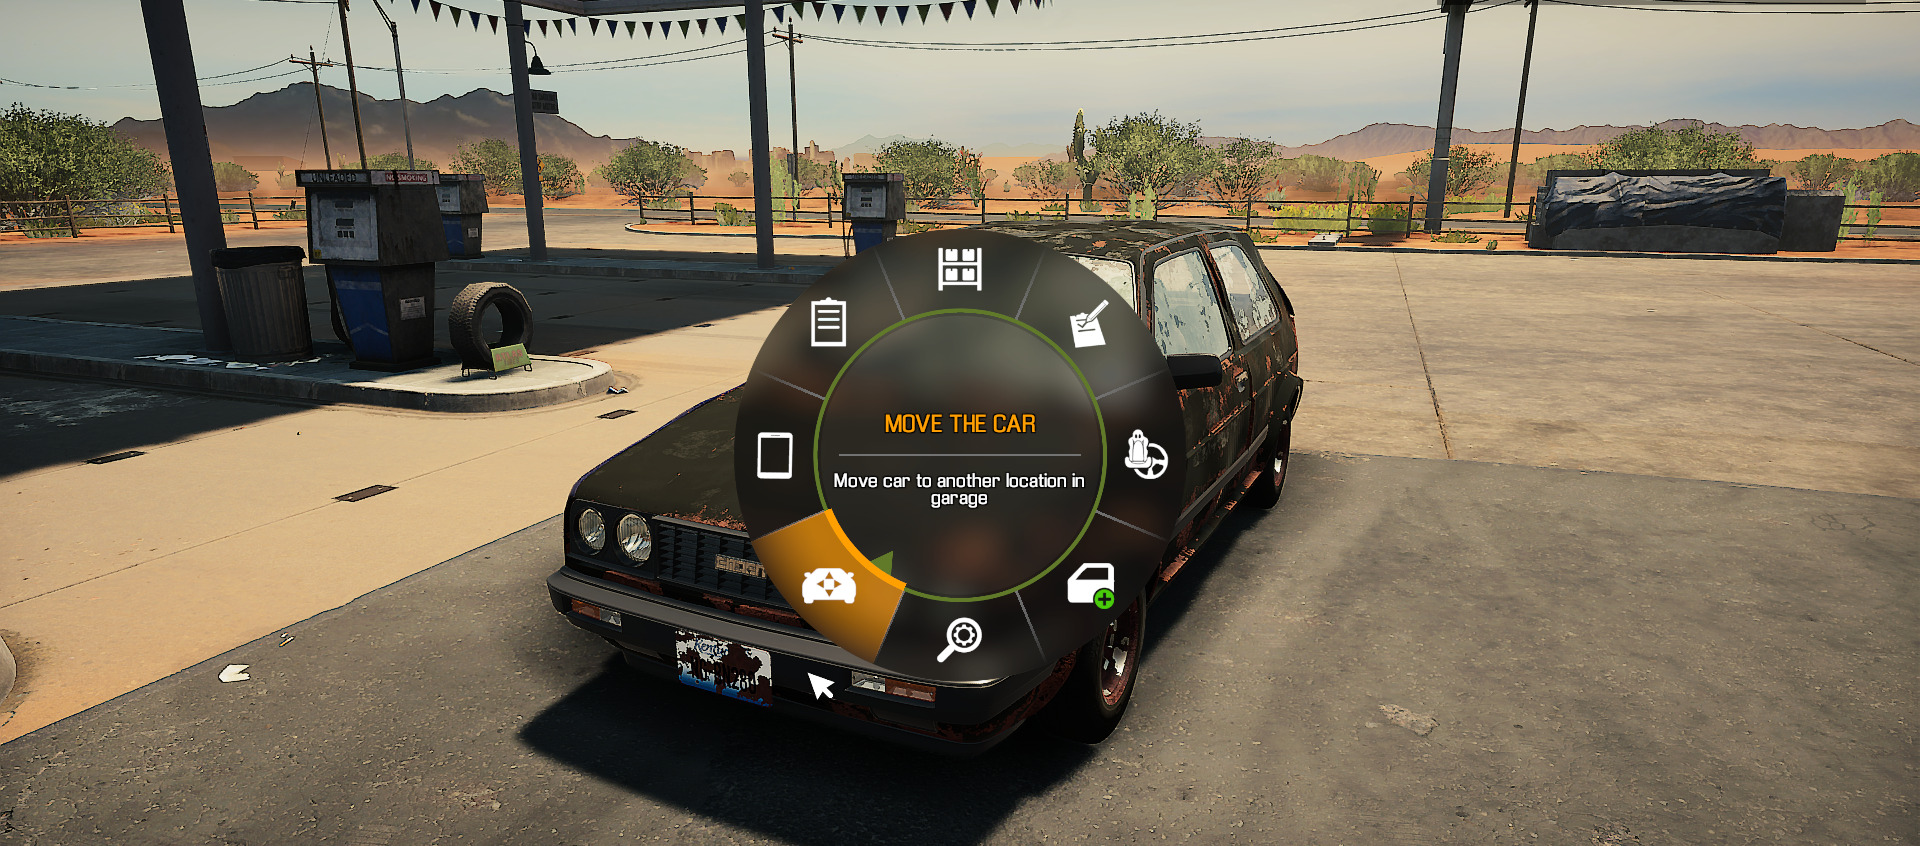 A screenshot showing the Move the Car command on the Pie Wheel in Car Mechanic Simulator